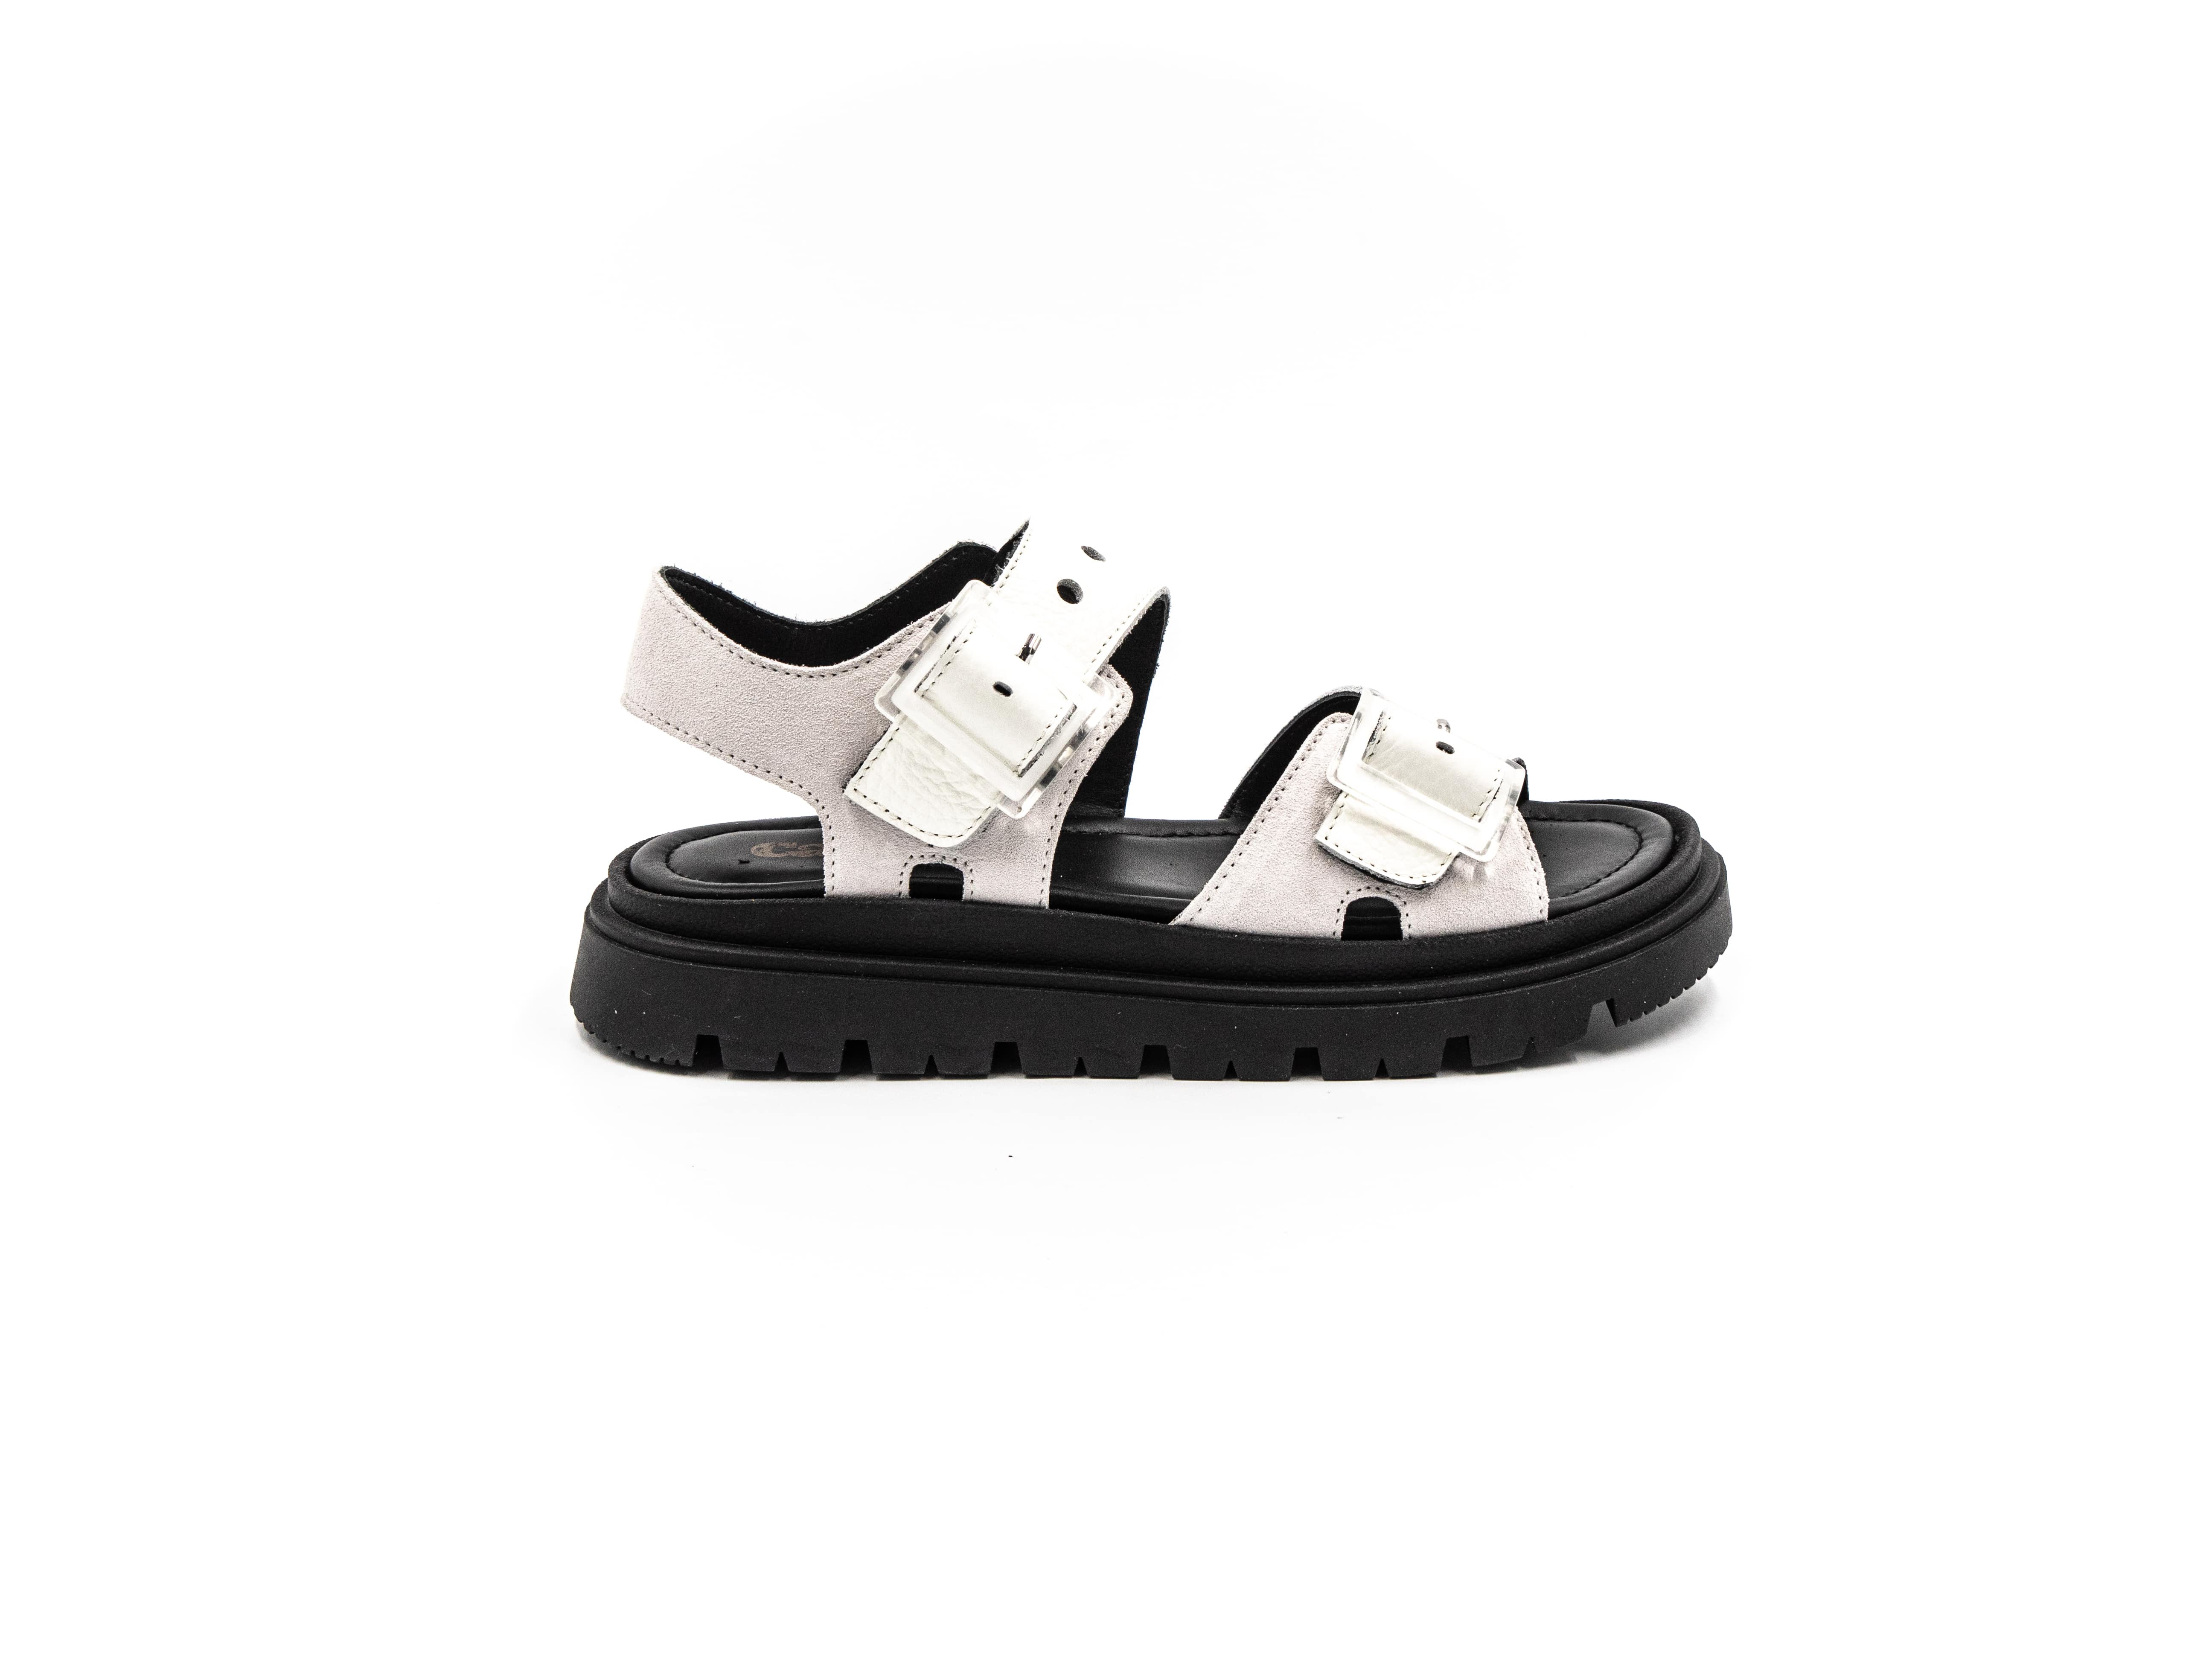 Flat sandals in silver and black.